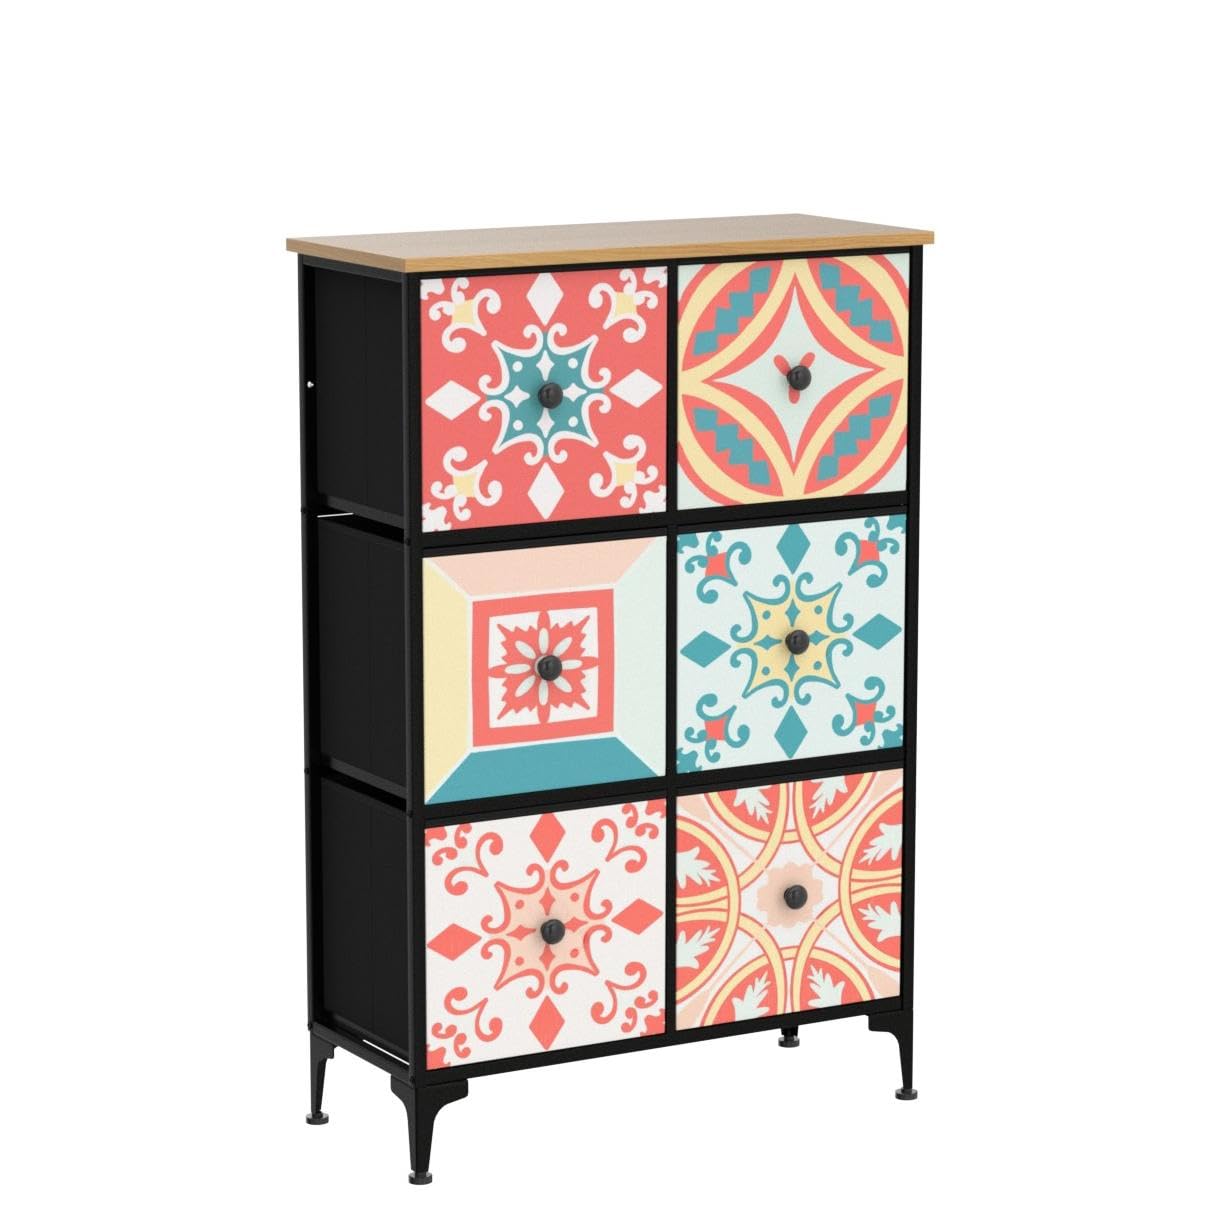 YILQQPER Dresser for Bedroom 8 Drawer Dressers & Chests of Drawers Tall Dresser Organizer Fabric Storage, Closet and Nursery Kids and Adult, Fabric Bins, Wood Top, Boho Colorful Painted